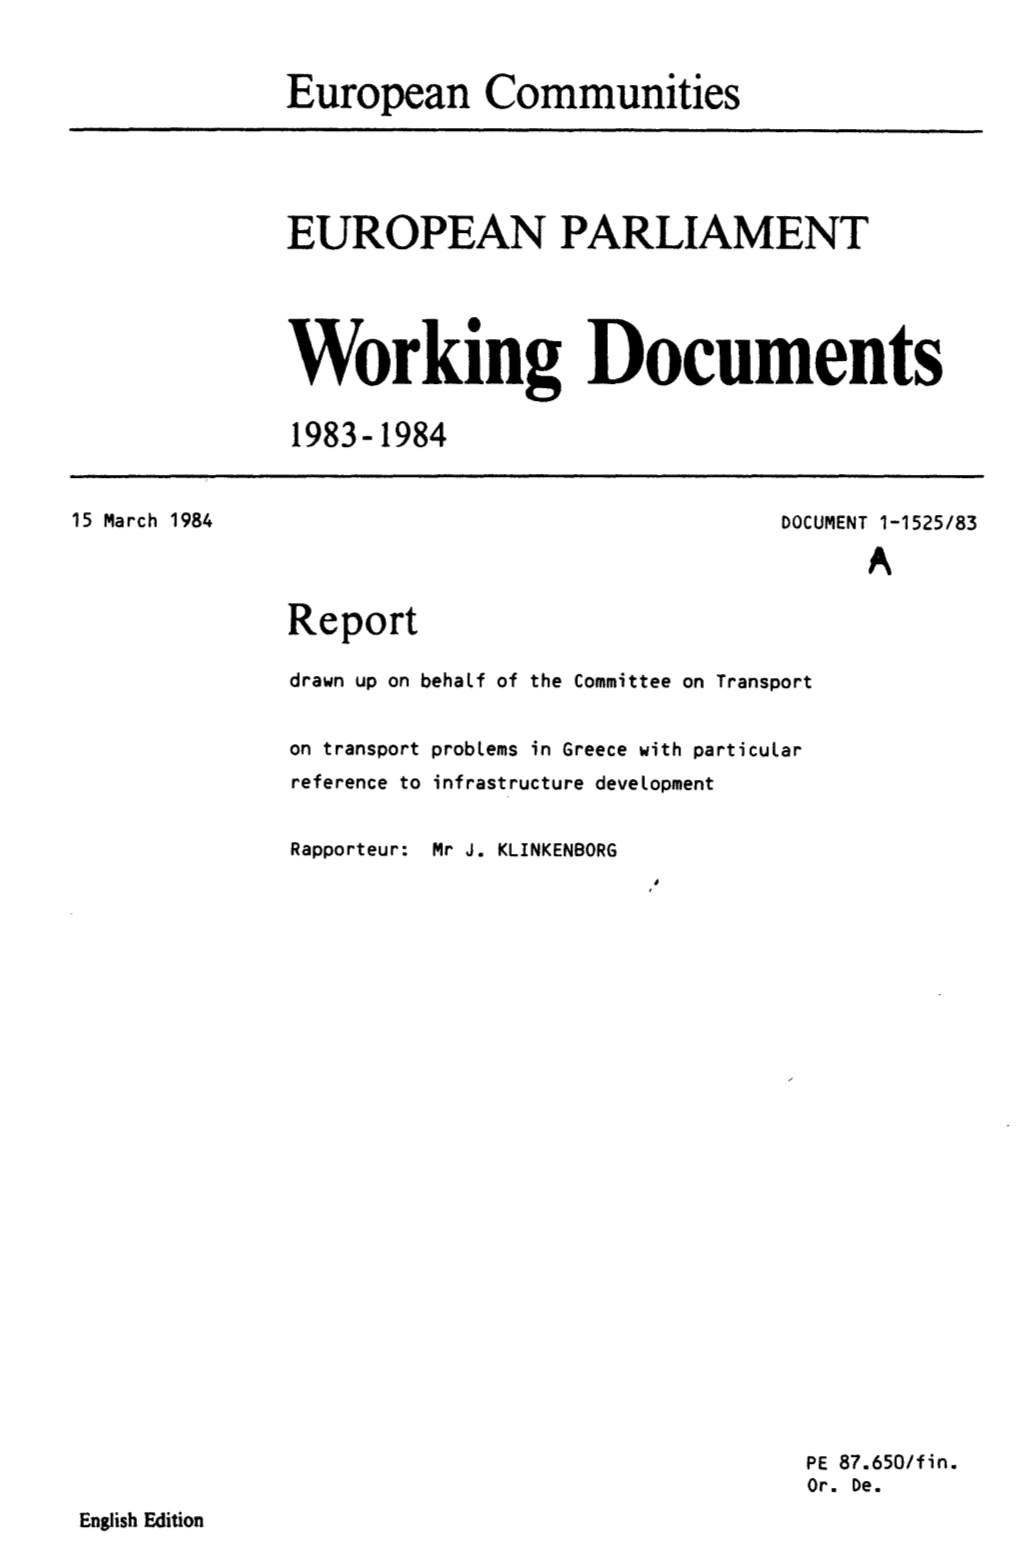 Working Documents 1983-1984